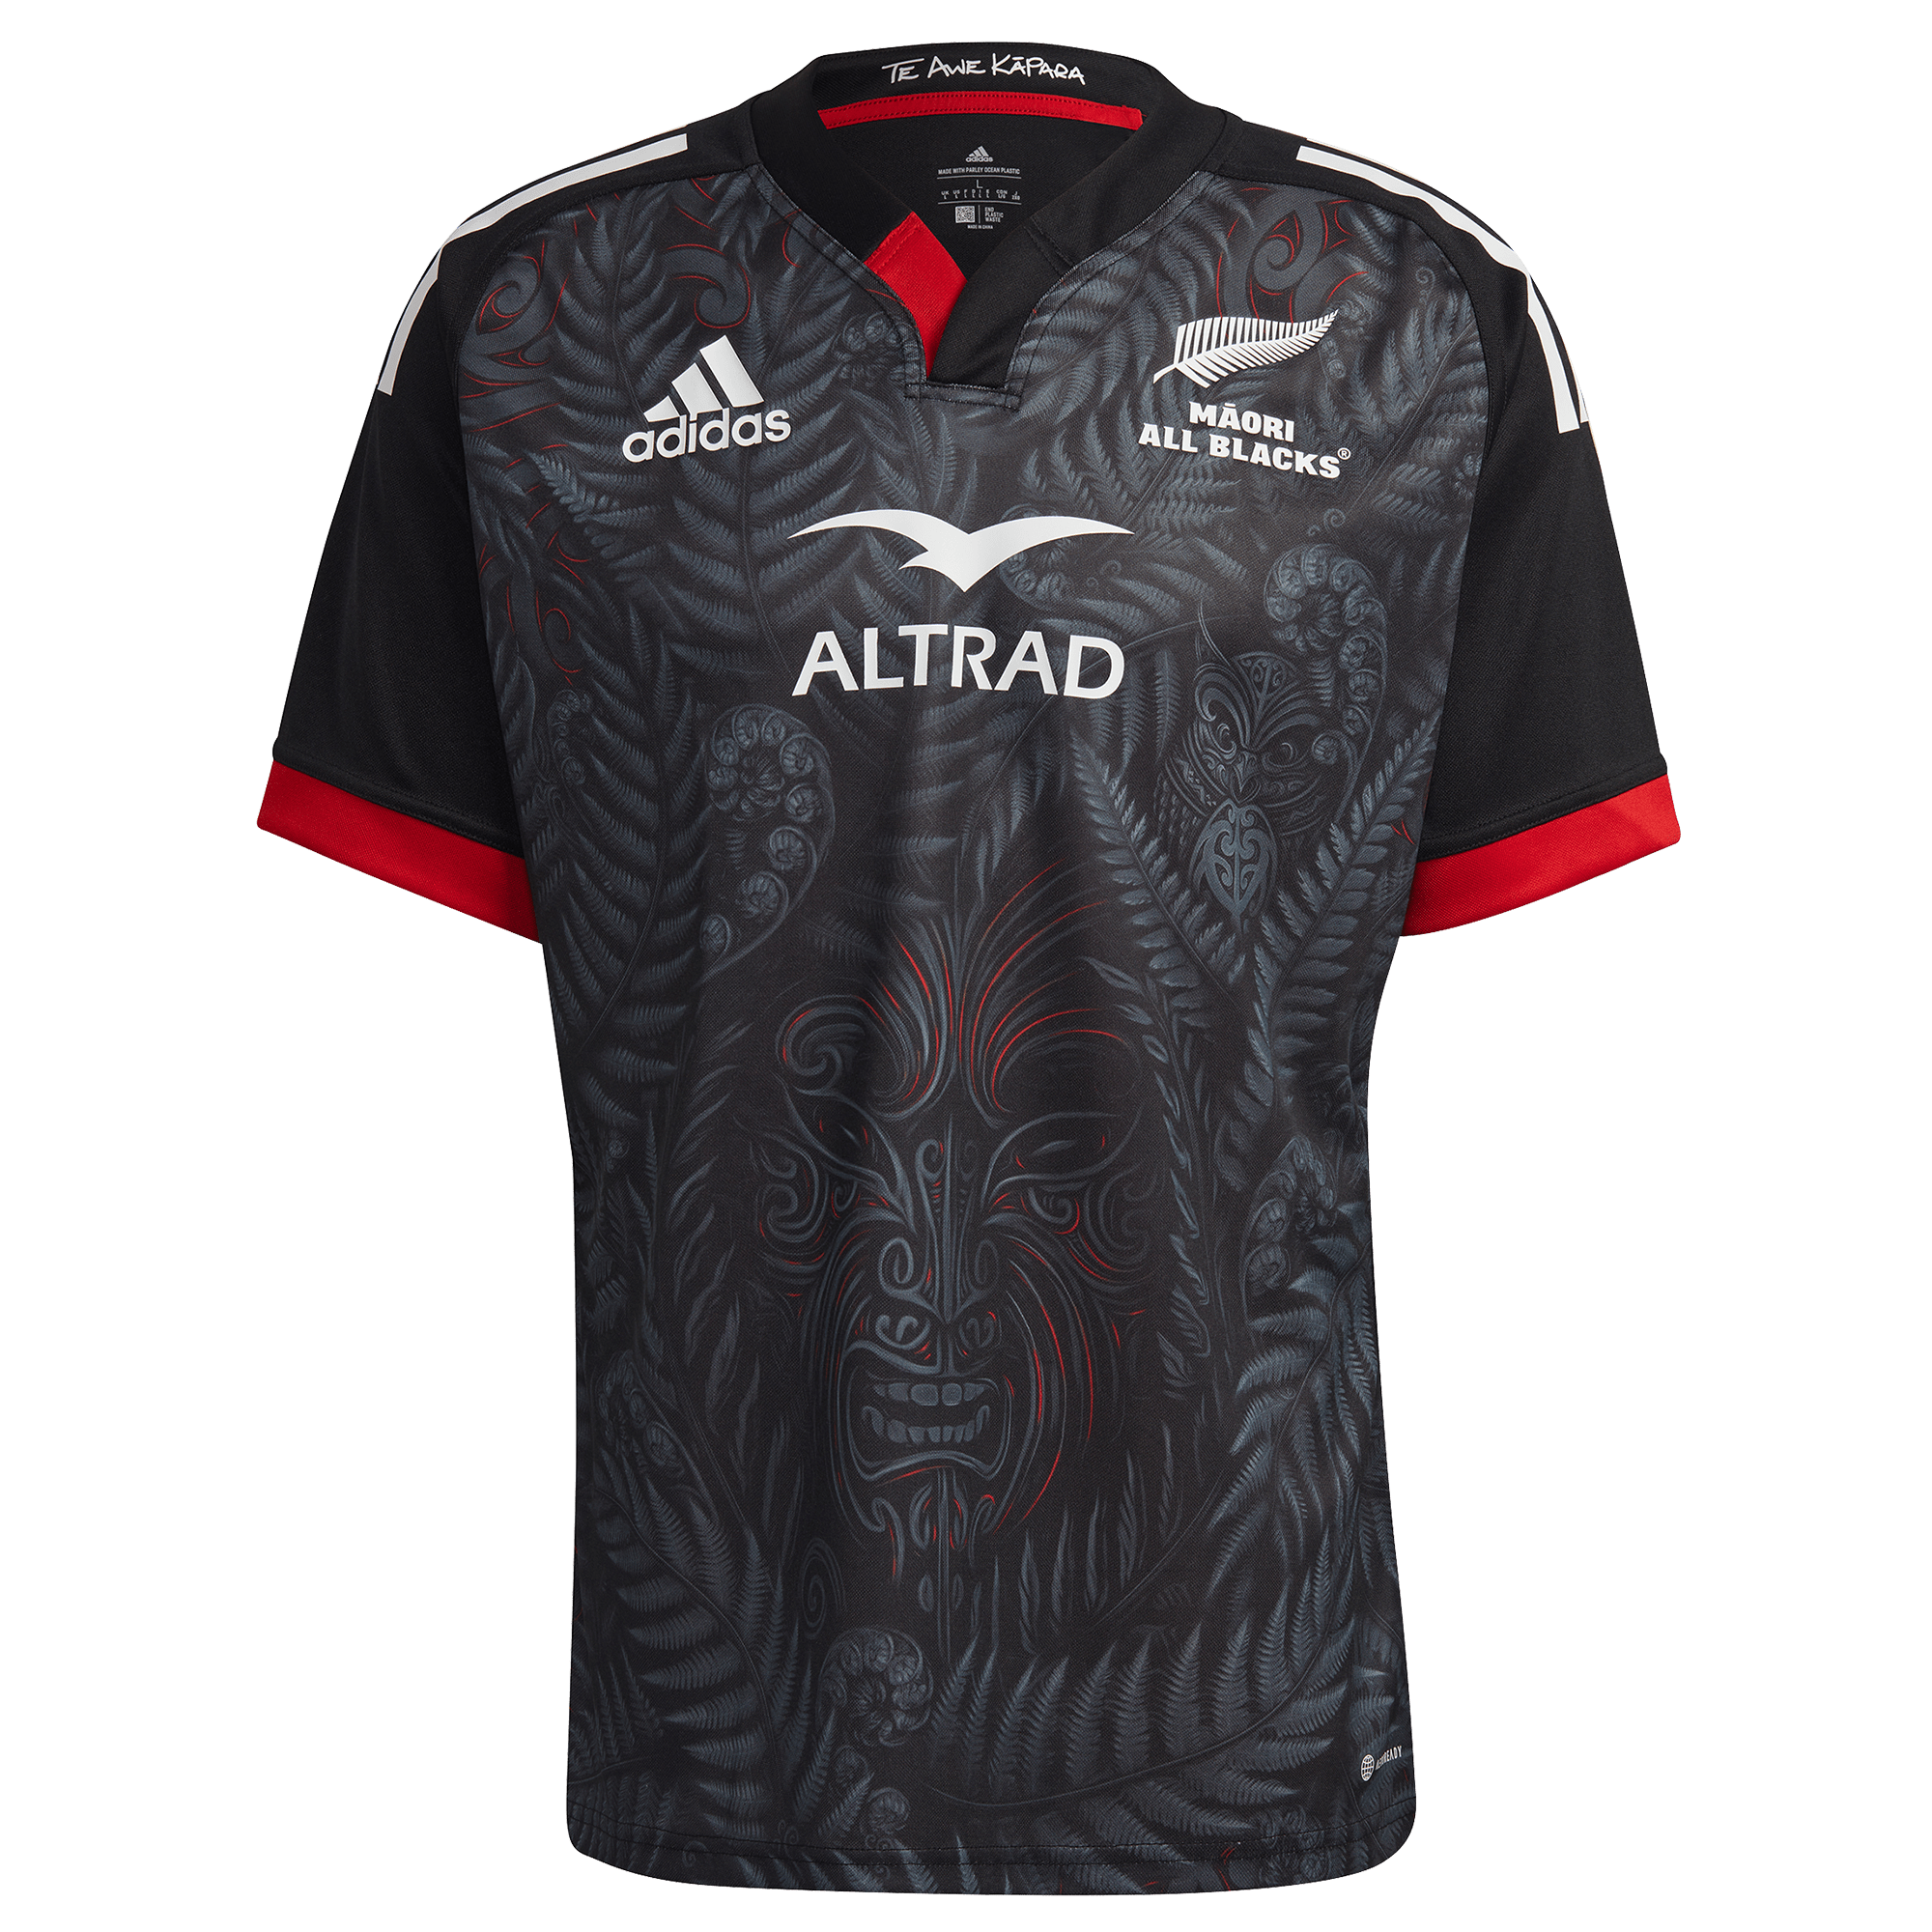 Māori All Blacks Rugby Jersey 2223 New Zealand Rugby Replica Home